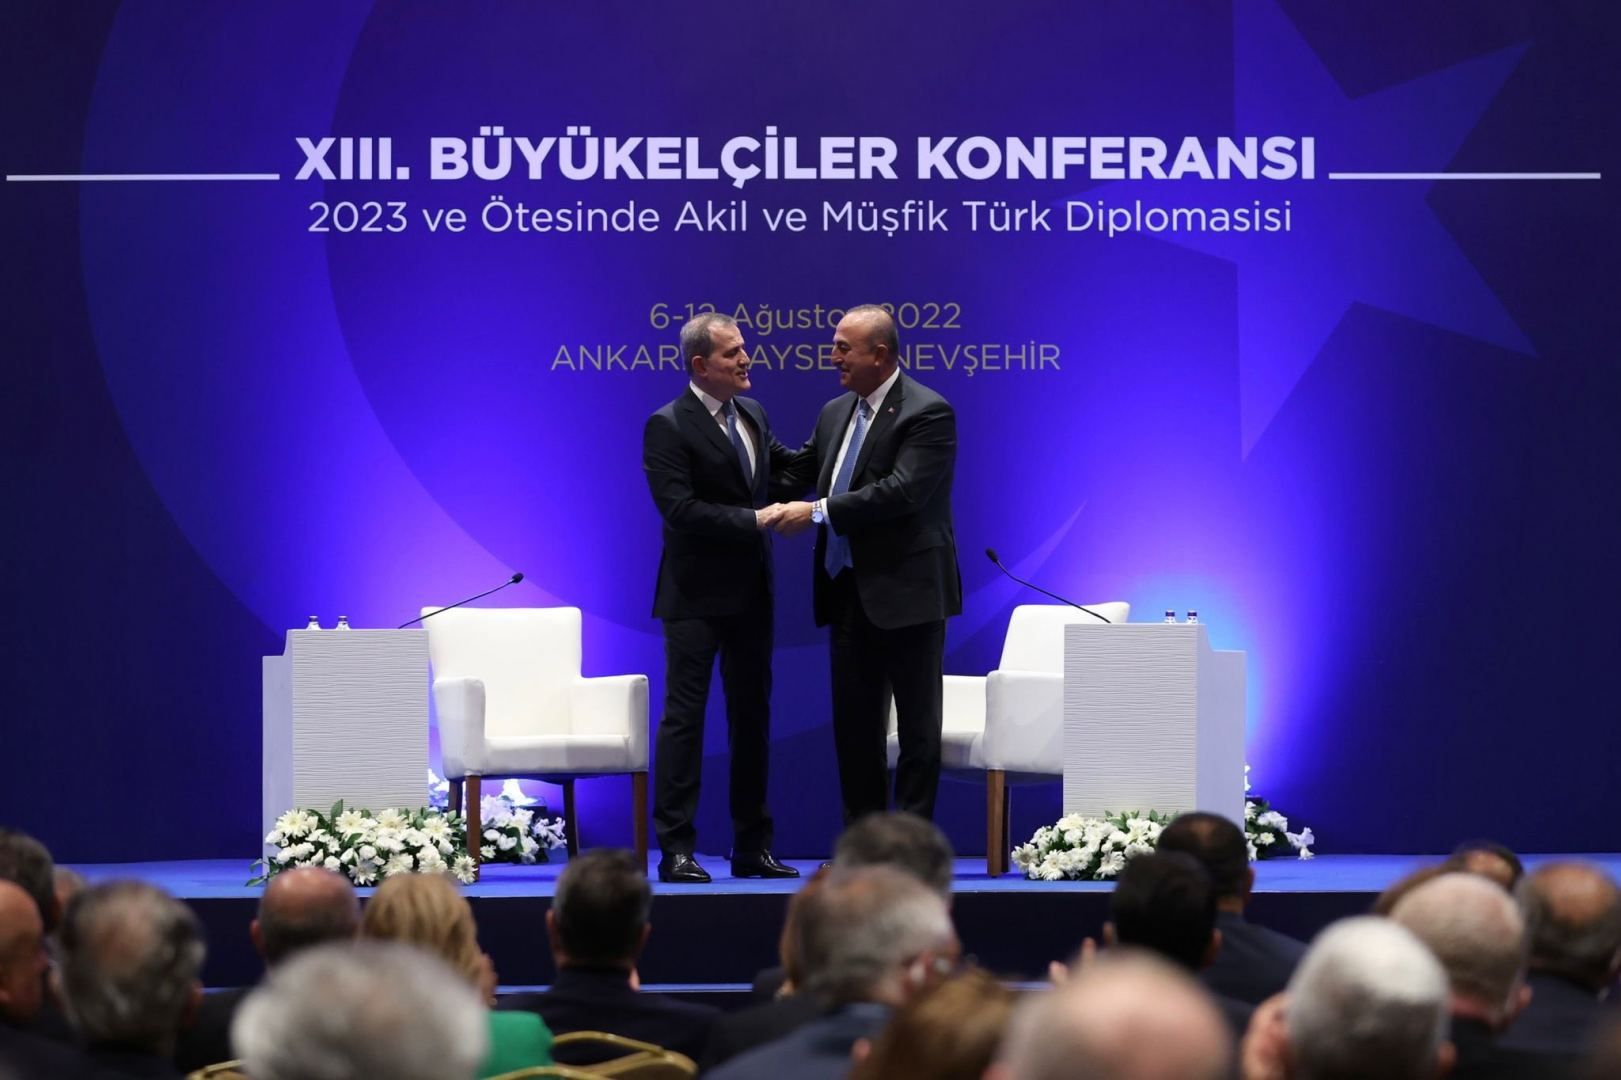 Azerbaijani-Turkish alliance aimed at bolstering regional peace, security - foreign minister [PHOTO] - Gallery Image